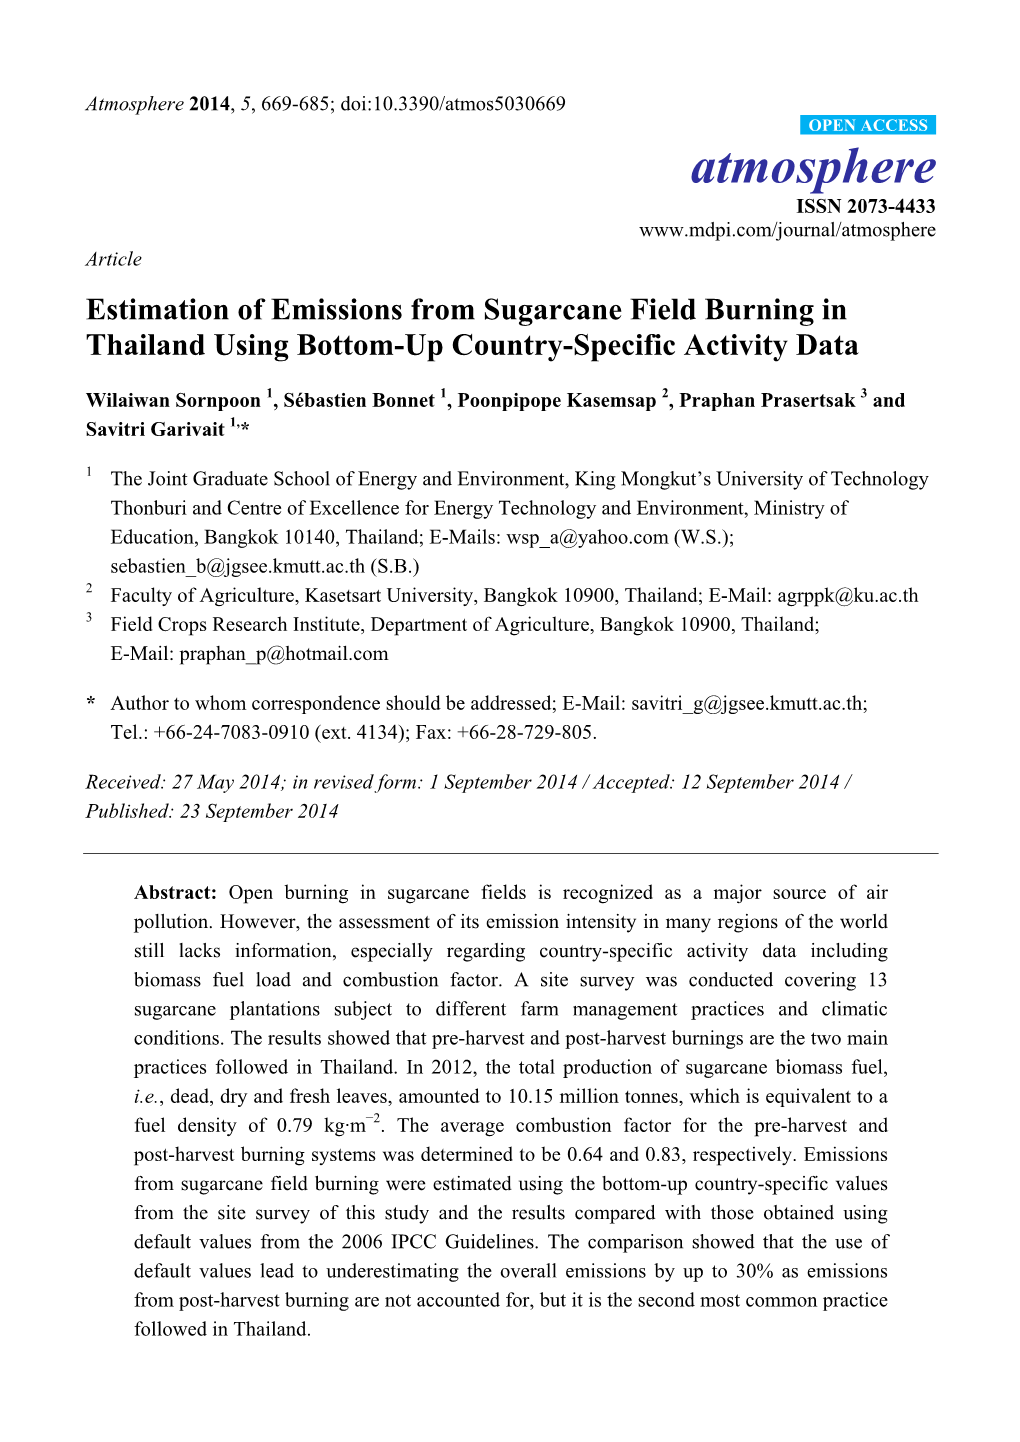 Estimation of Emissions from Sugarcane Field Burning in Thailand Using Bottom-Up Country-Specific Activity Data